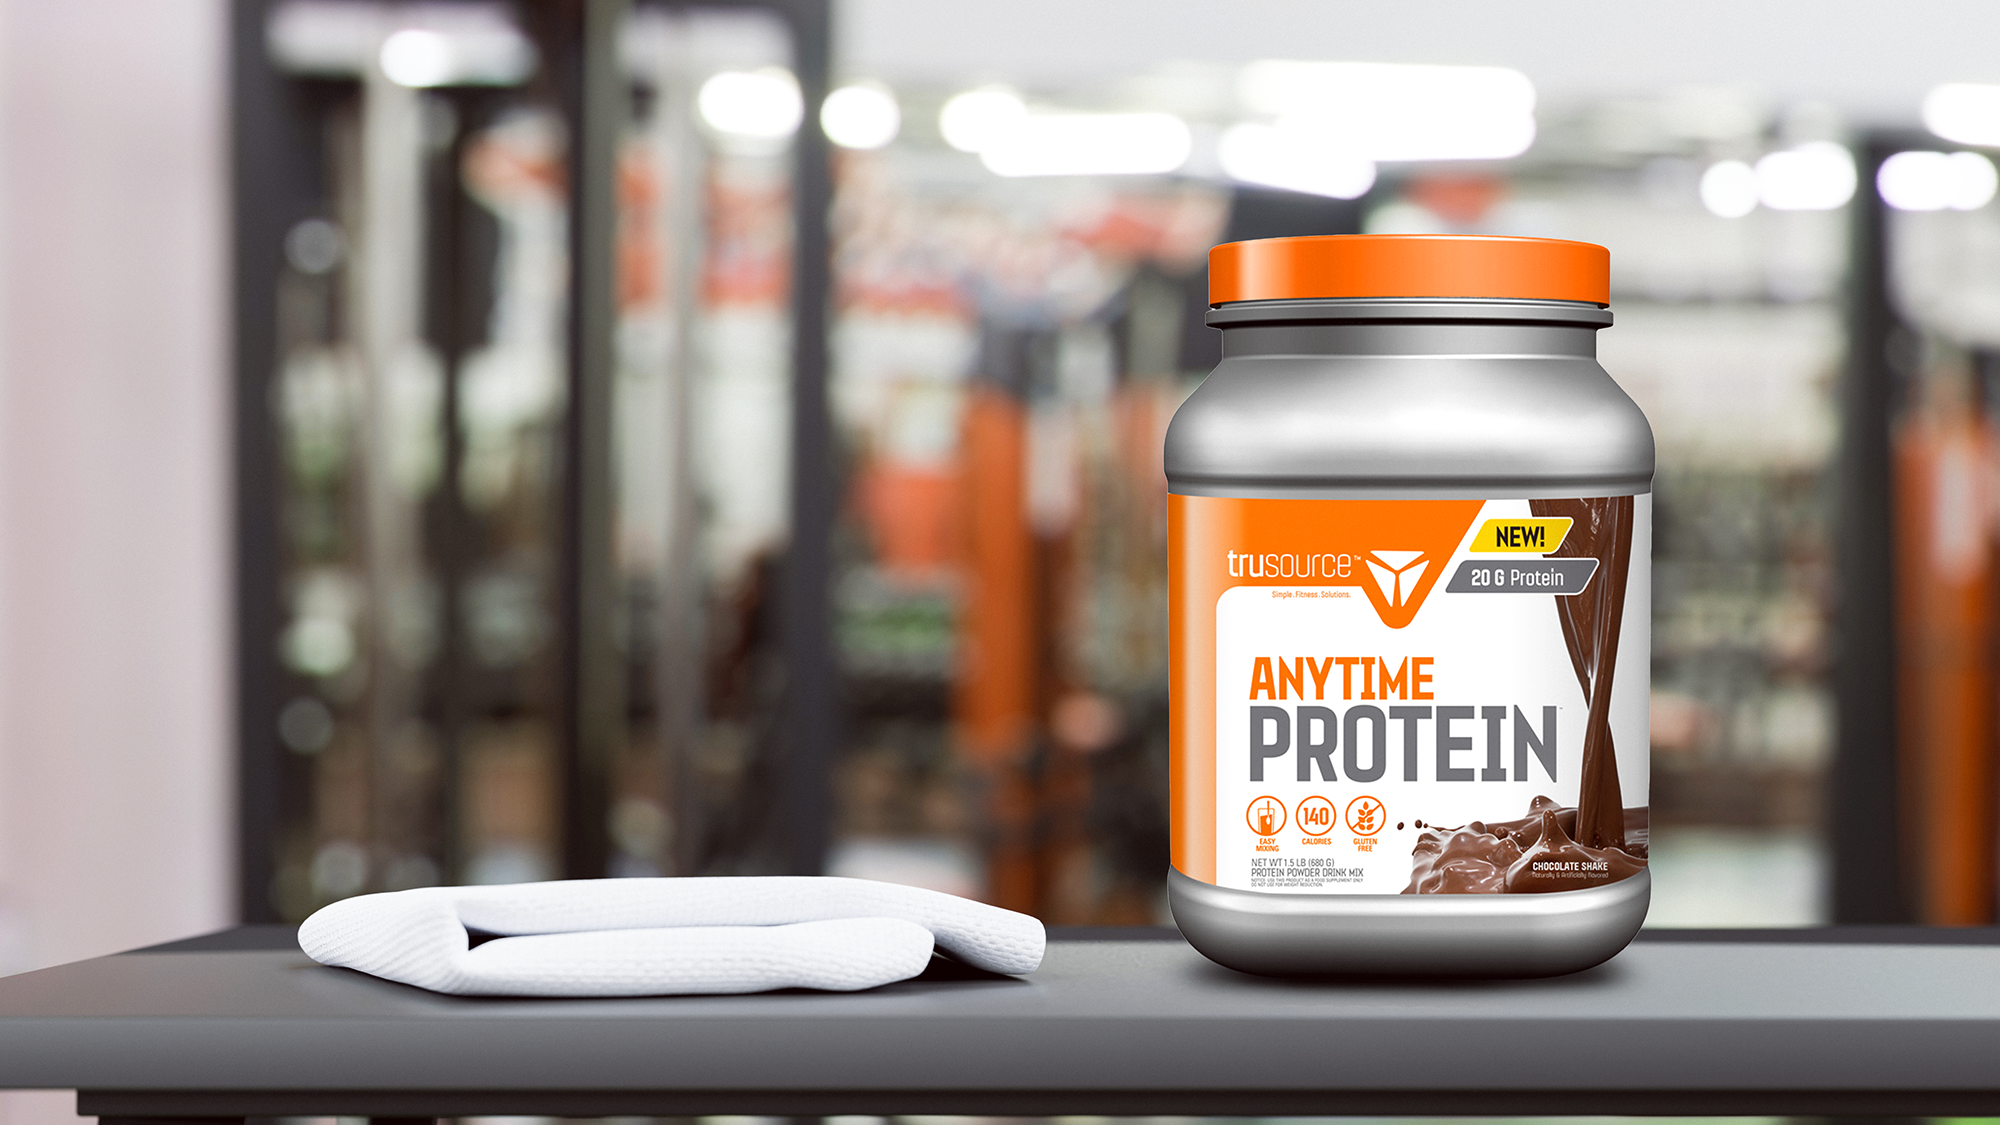 Custom nutrition canister for Trusource protein powder